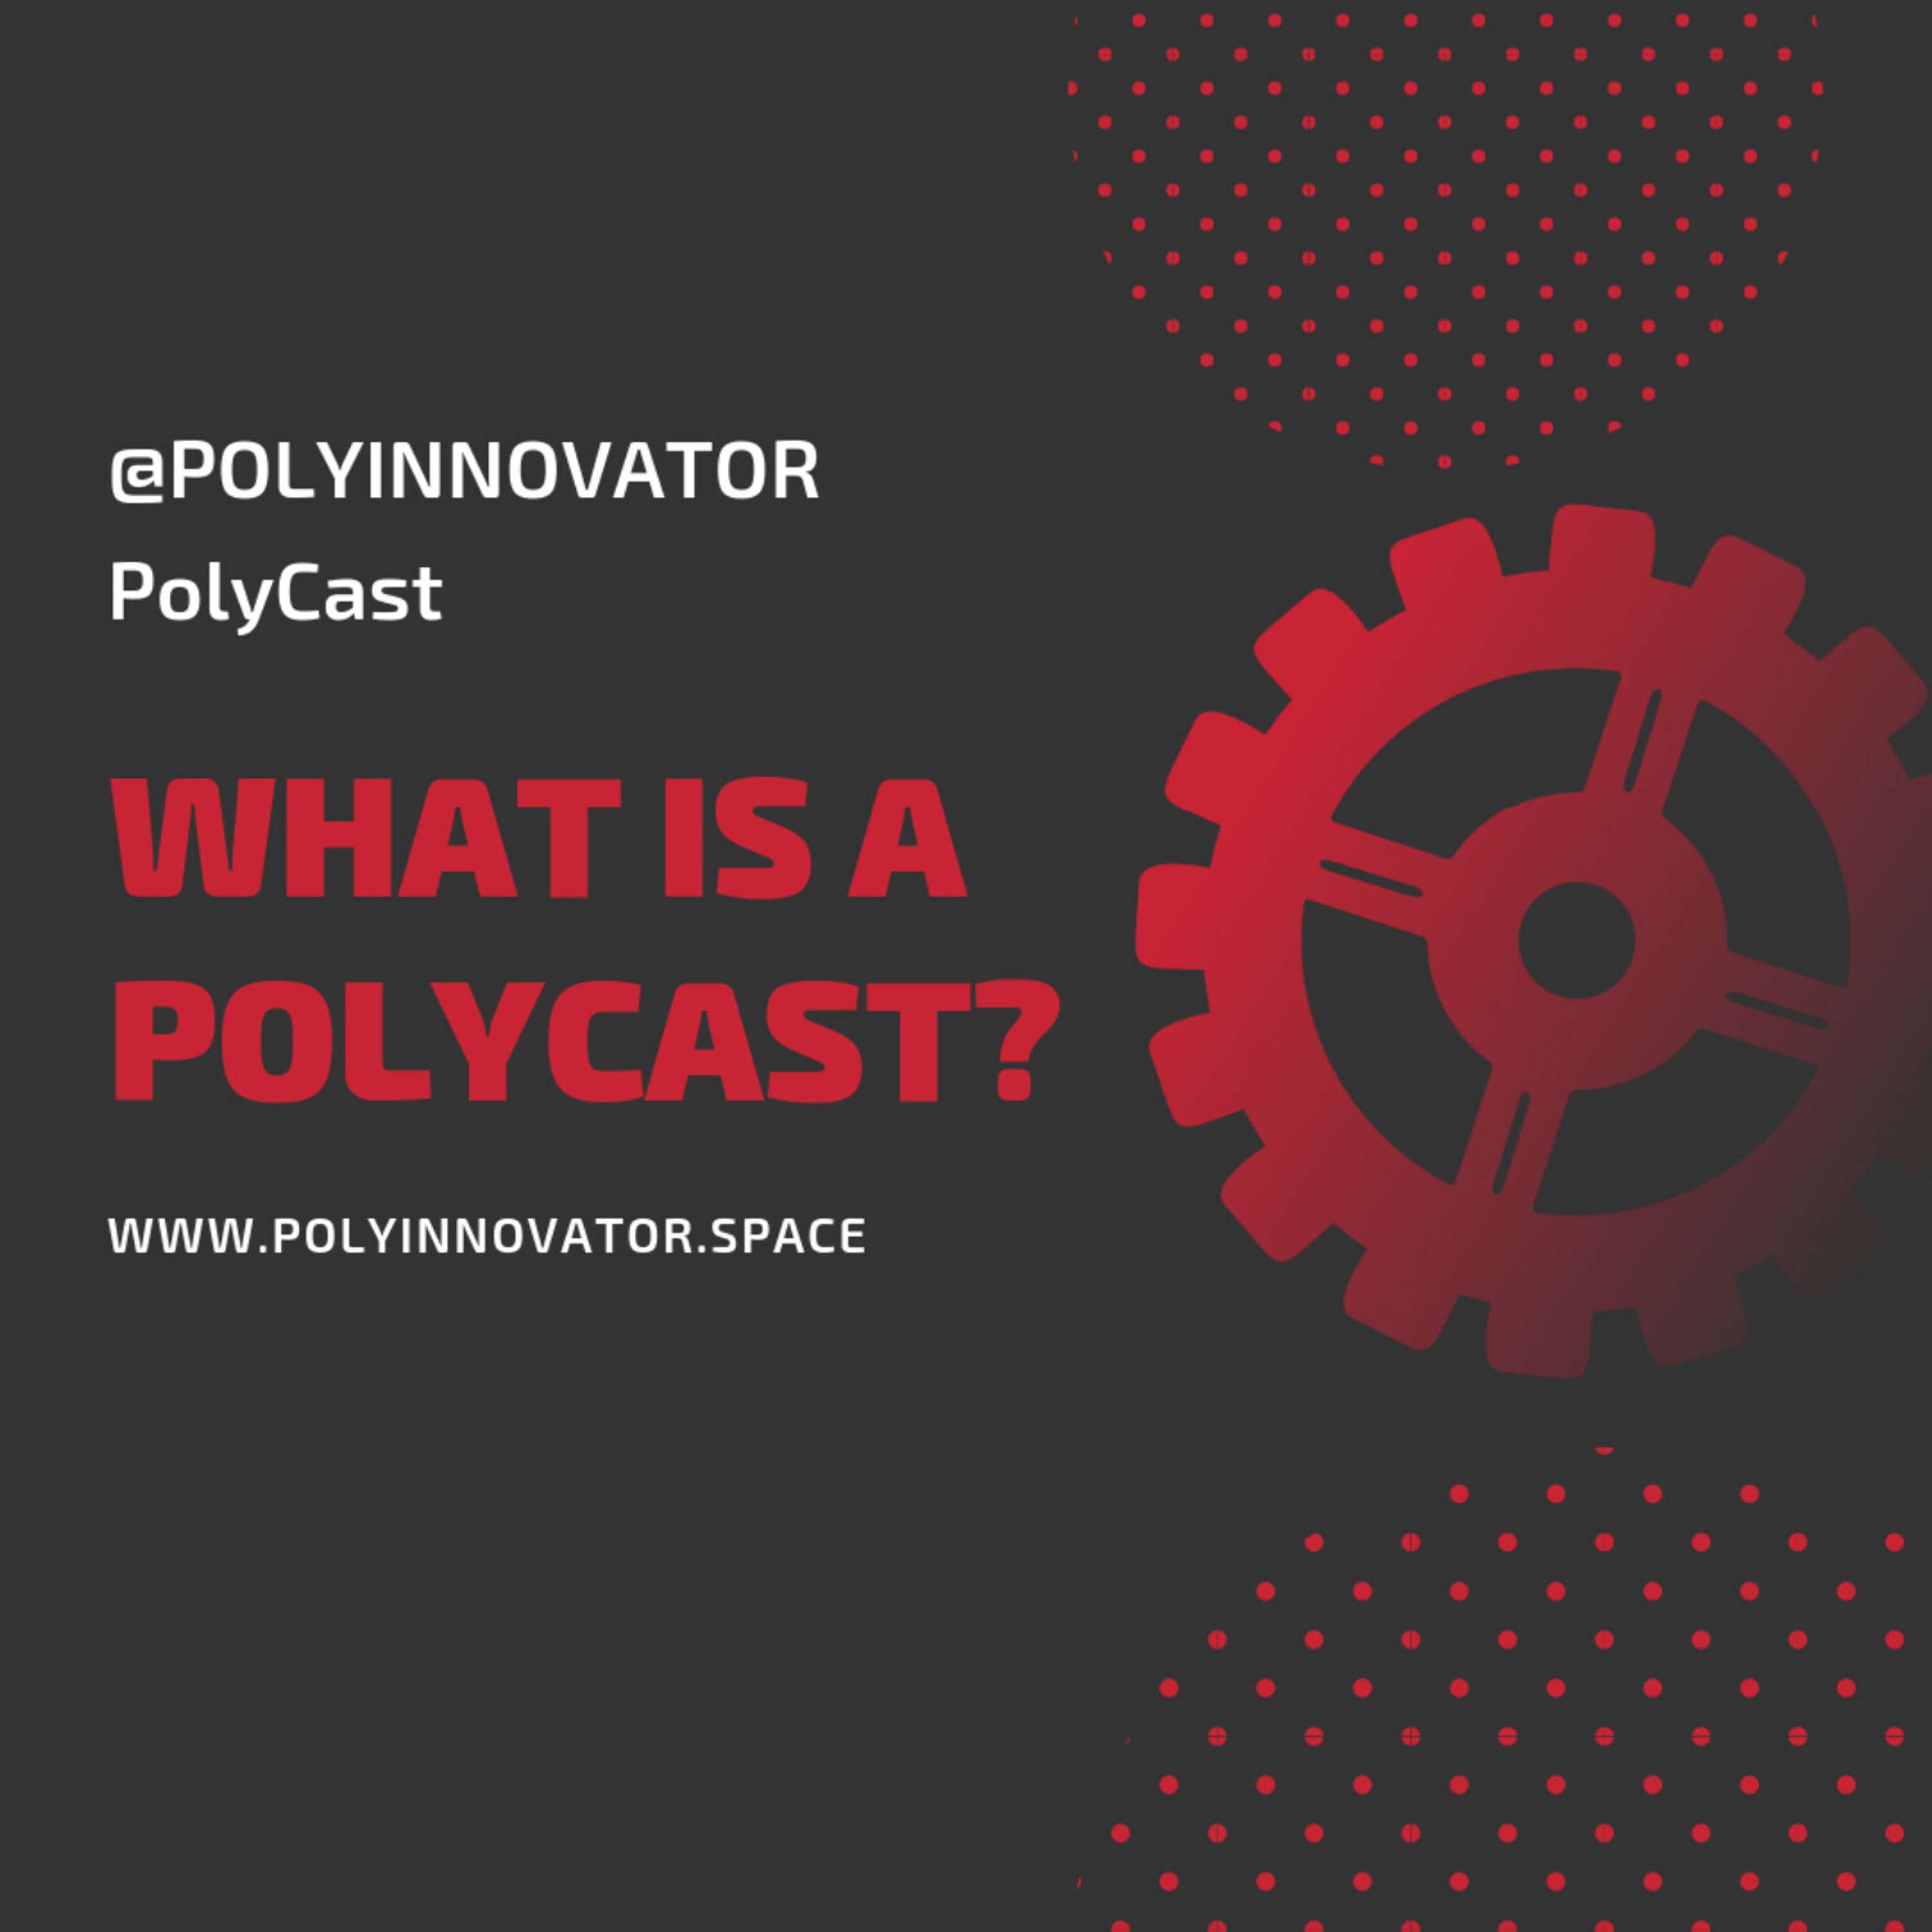 What is a PolyCast? [Fireside Polycast]